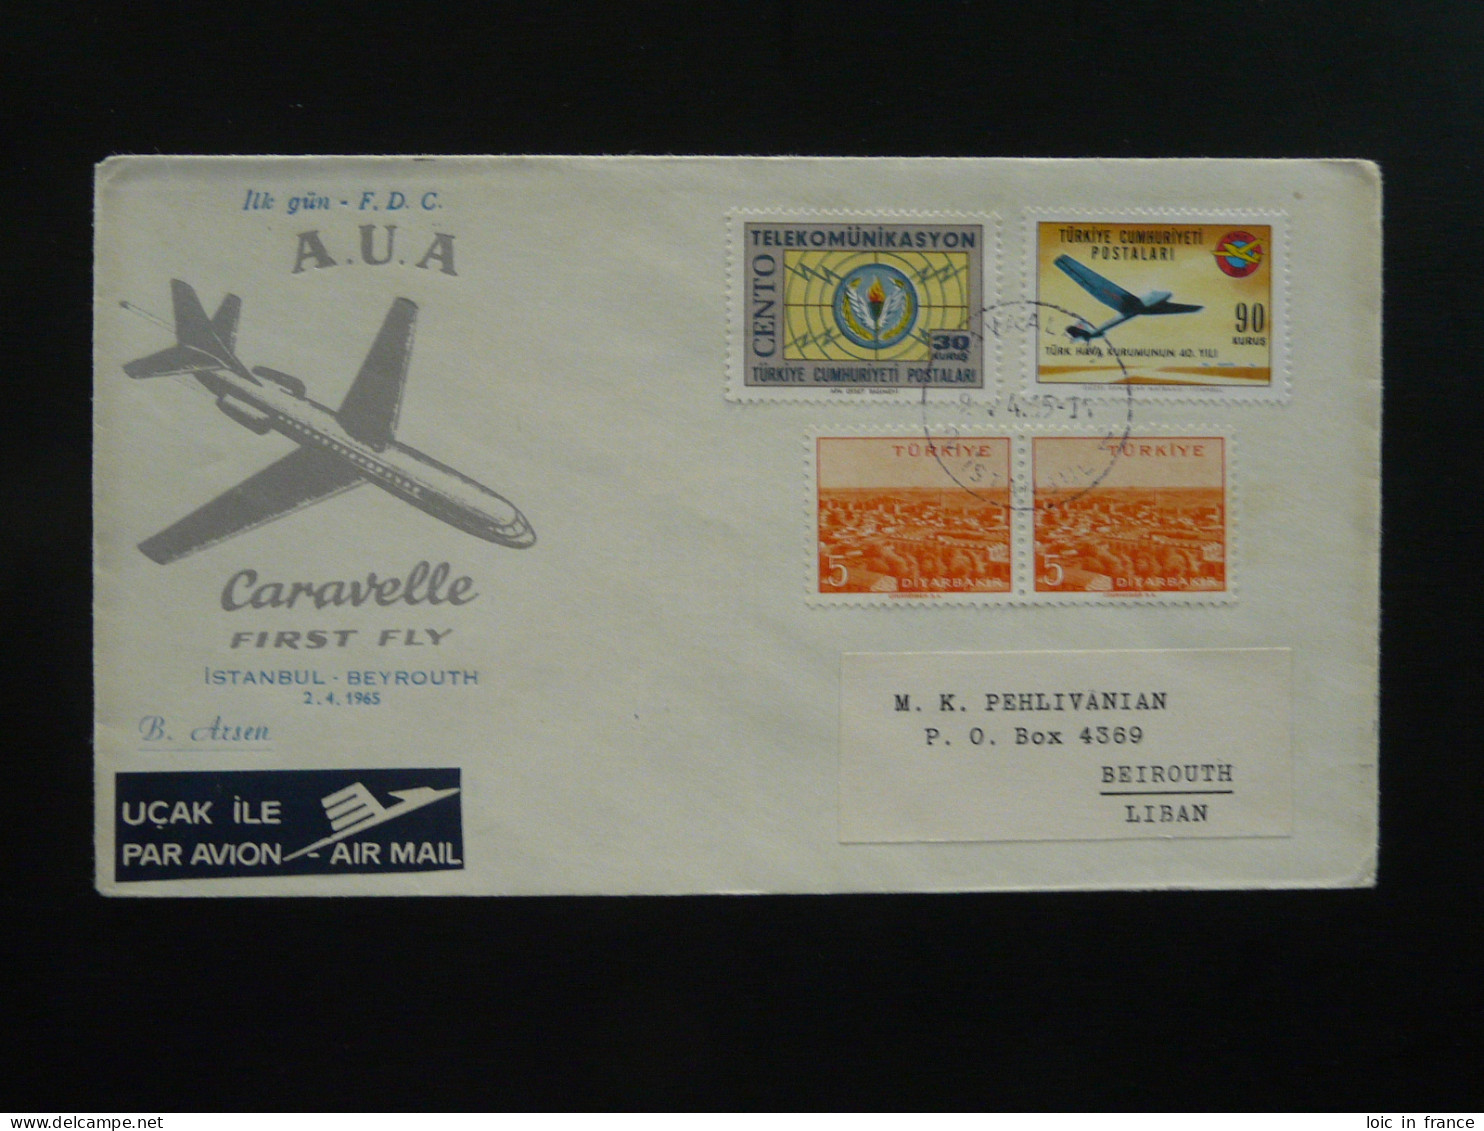 Lettre Premier Vol First Flight Cover Istanbul --> Beyrouth Liban Lebanon Caravelle AUA Austrian Airlines 1965 (ex 3) - Lettres & Documents